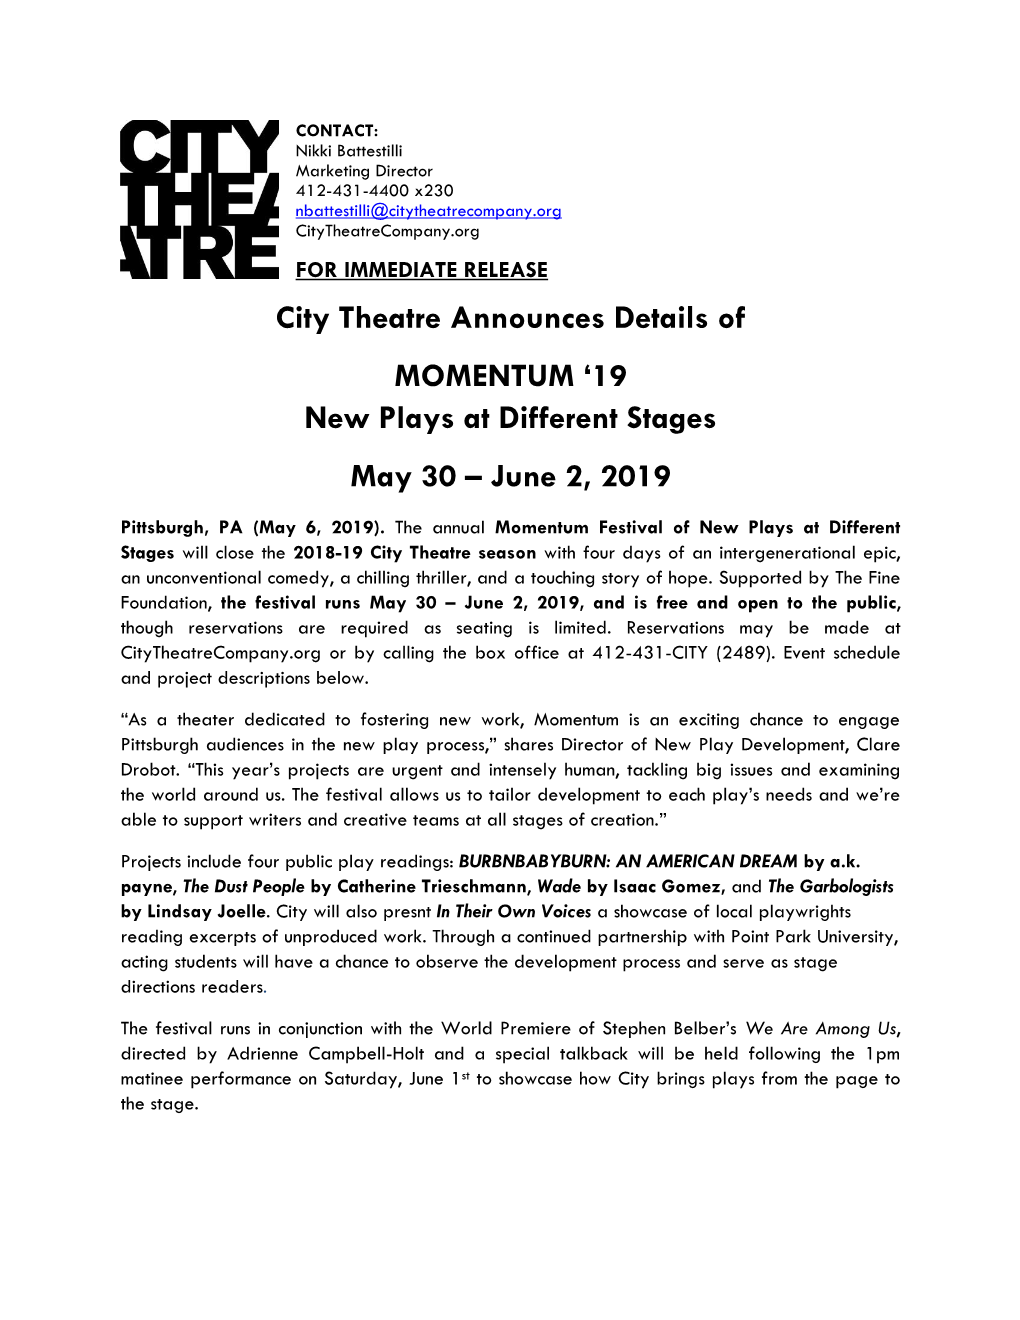 City Theatre Announces Details of MOMENTUM '19 New Plays At